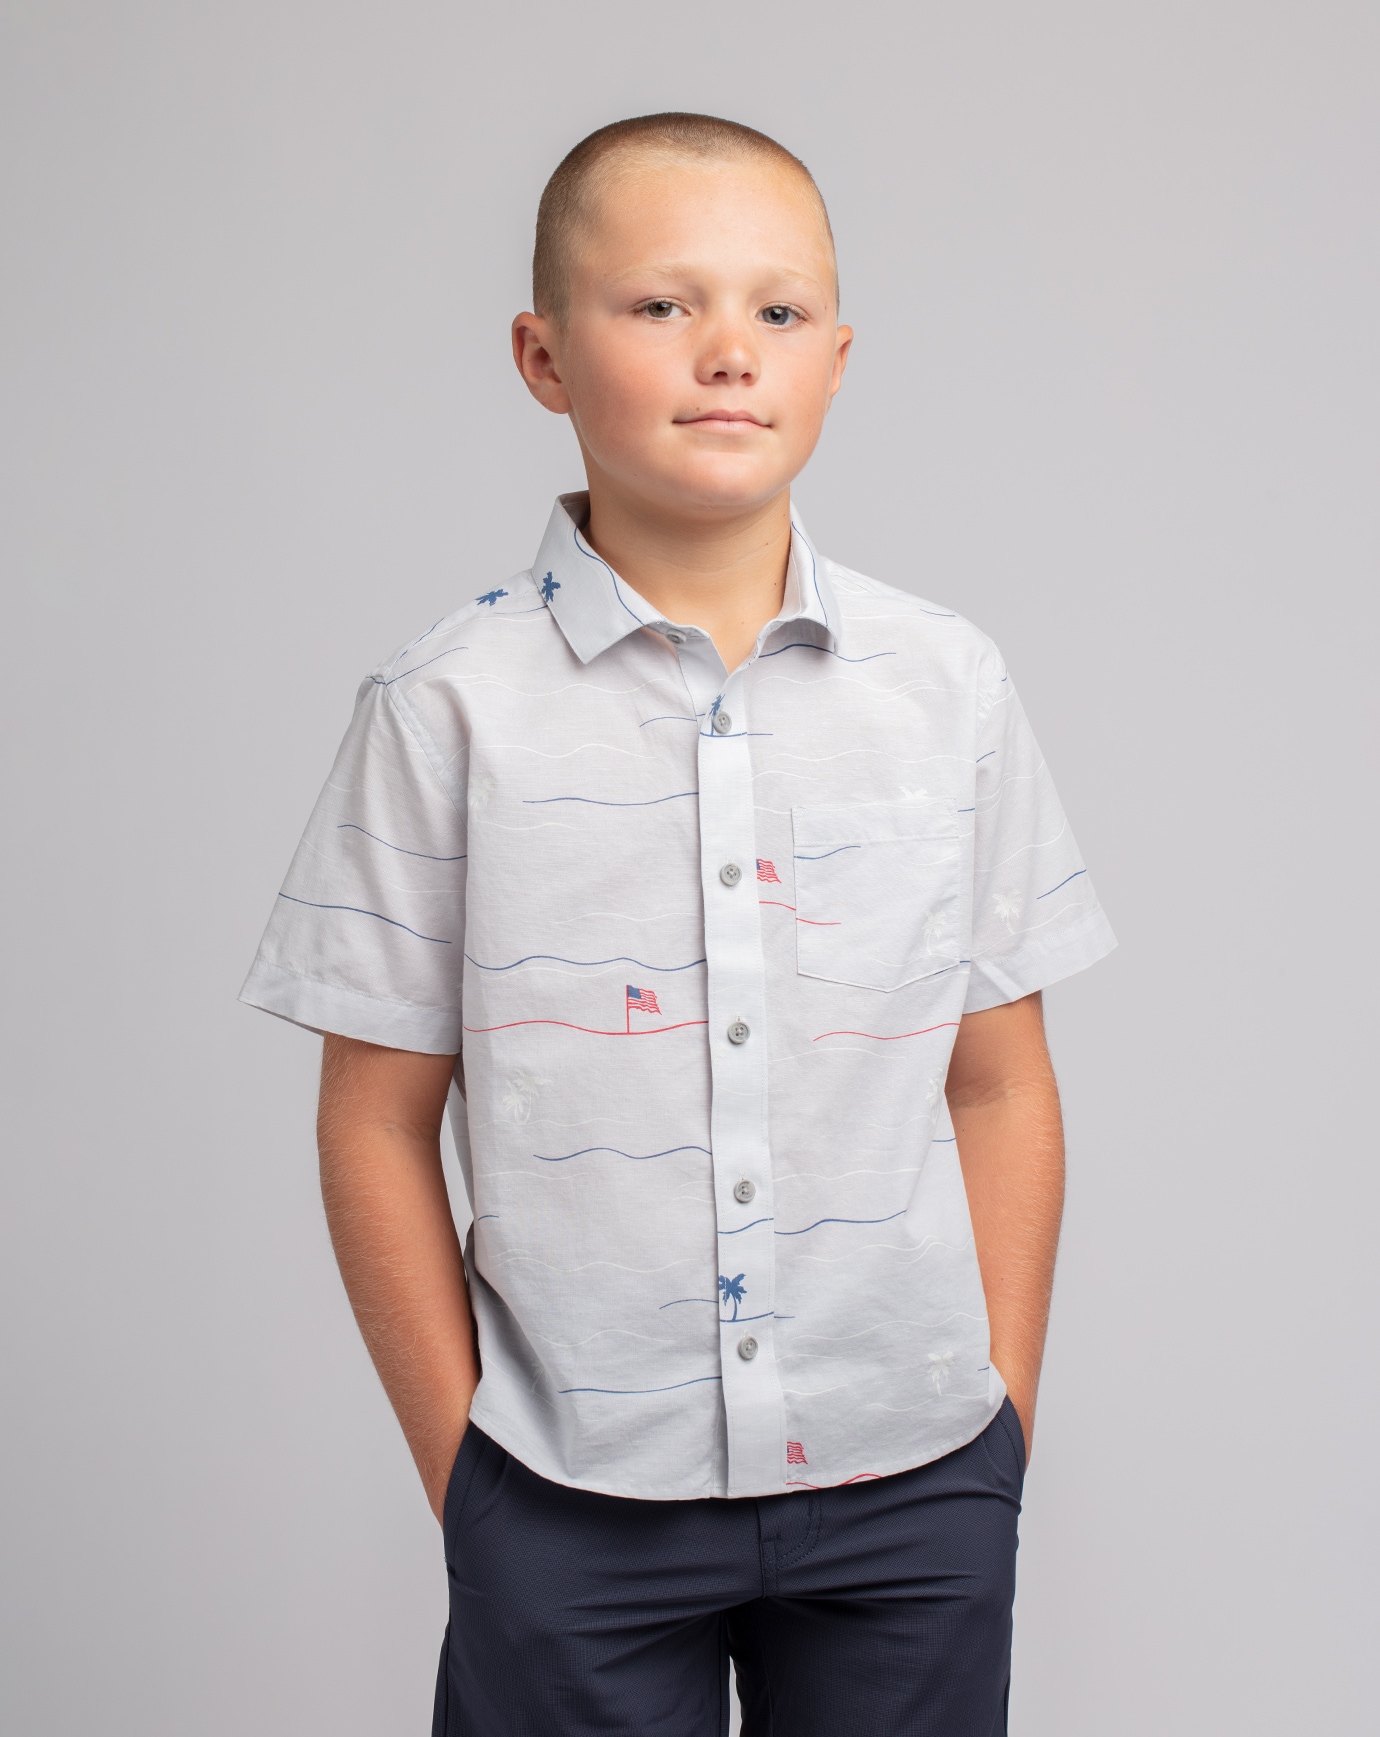 STAR SPANGLED BANNER YOUTH BUTTON-UP Image 1